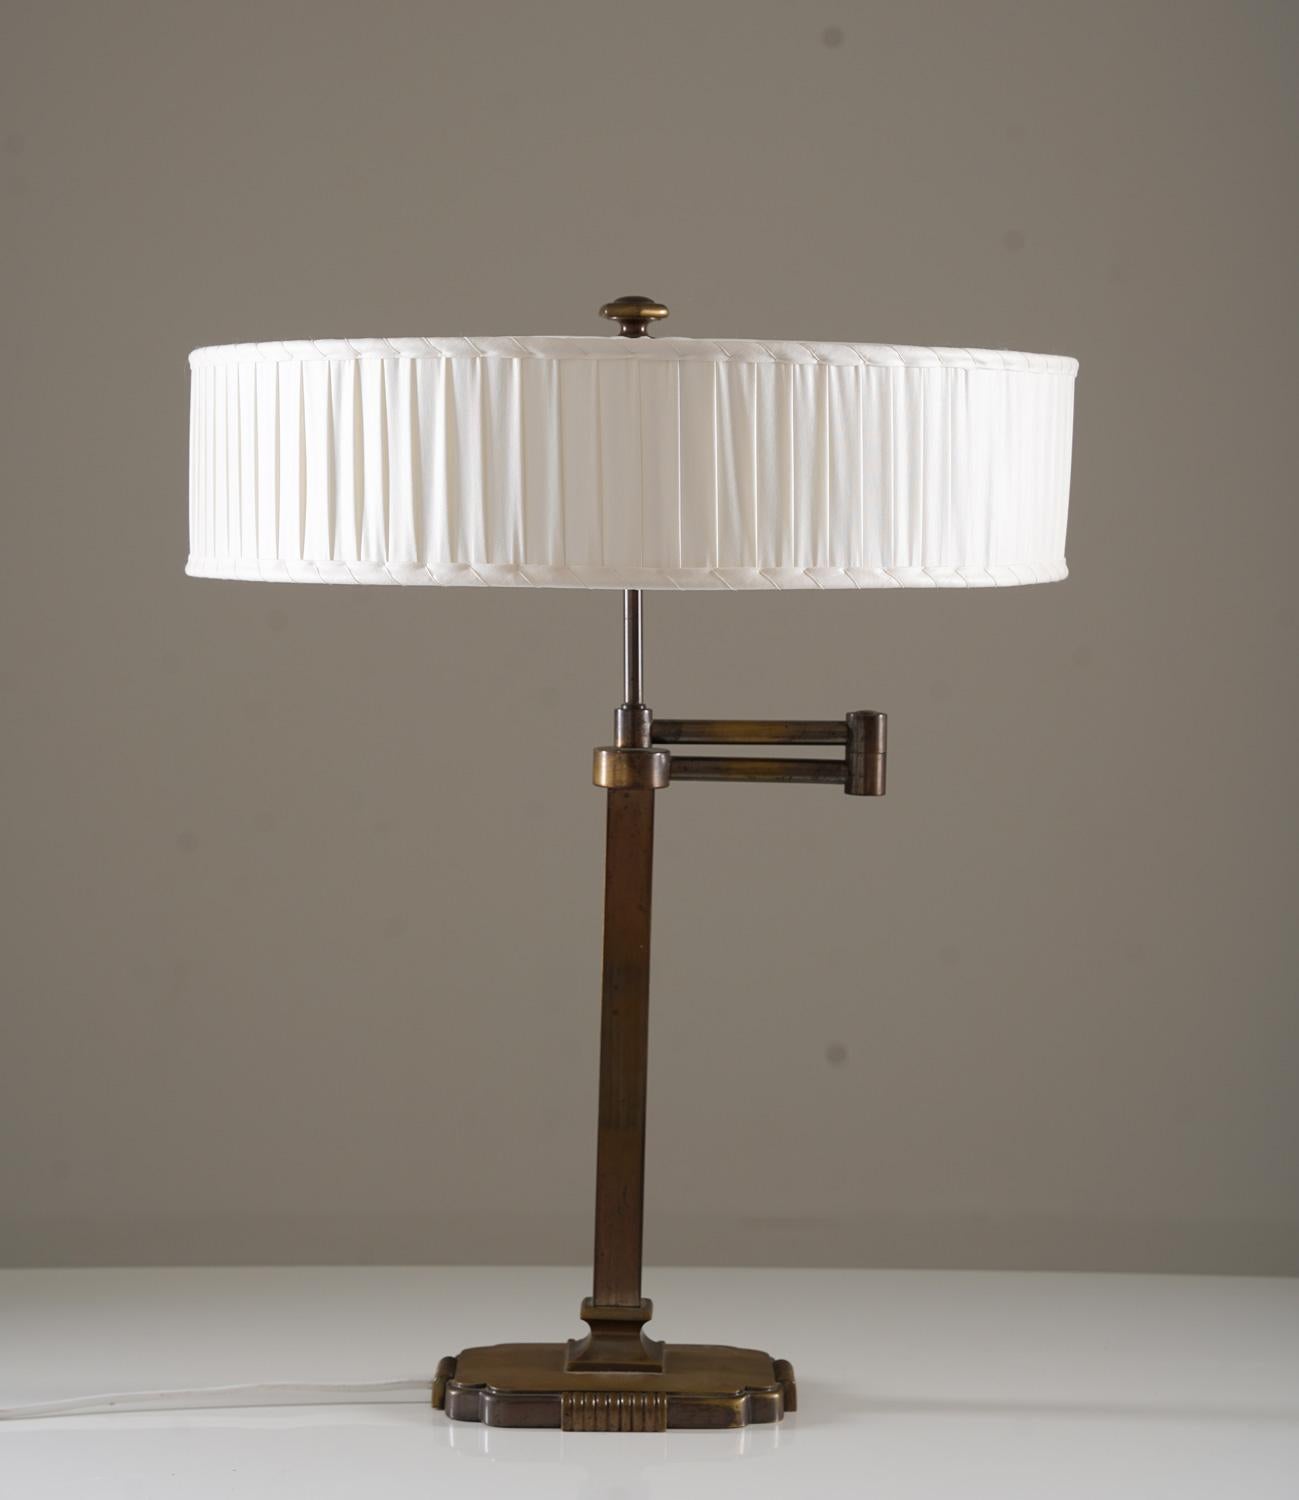 Swivel arm table lamp in brass manufactured in Sweden, 1940s. 
This elegant lamp was manufactured during the Swedish Modern era and is of very high quality. It is made of oxidized brass and has a large hand-pleated chintz shade.

Condition: Very